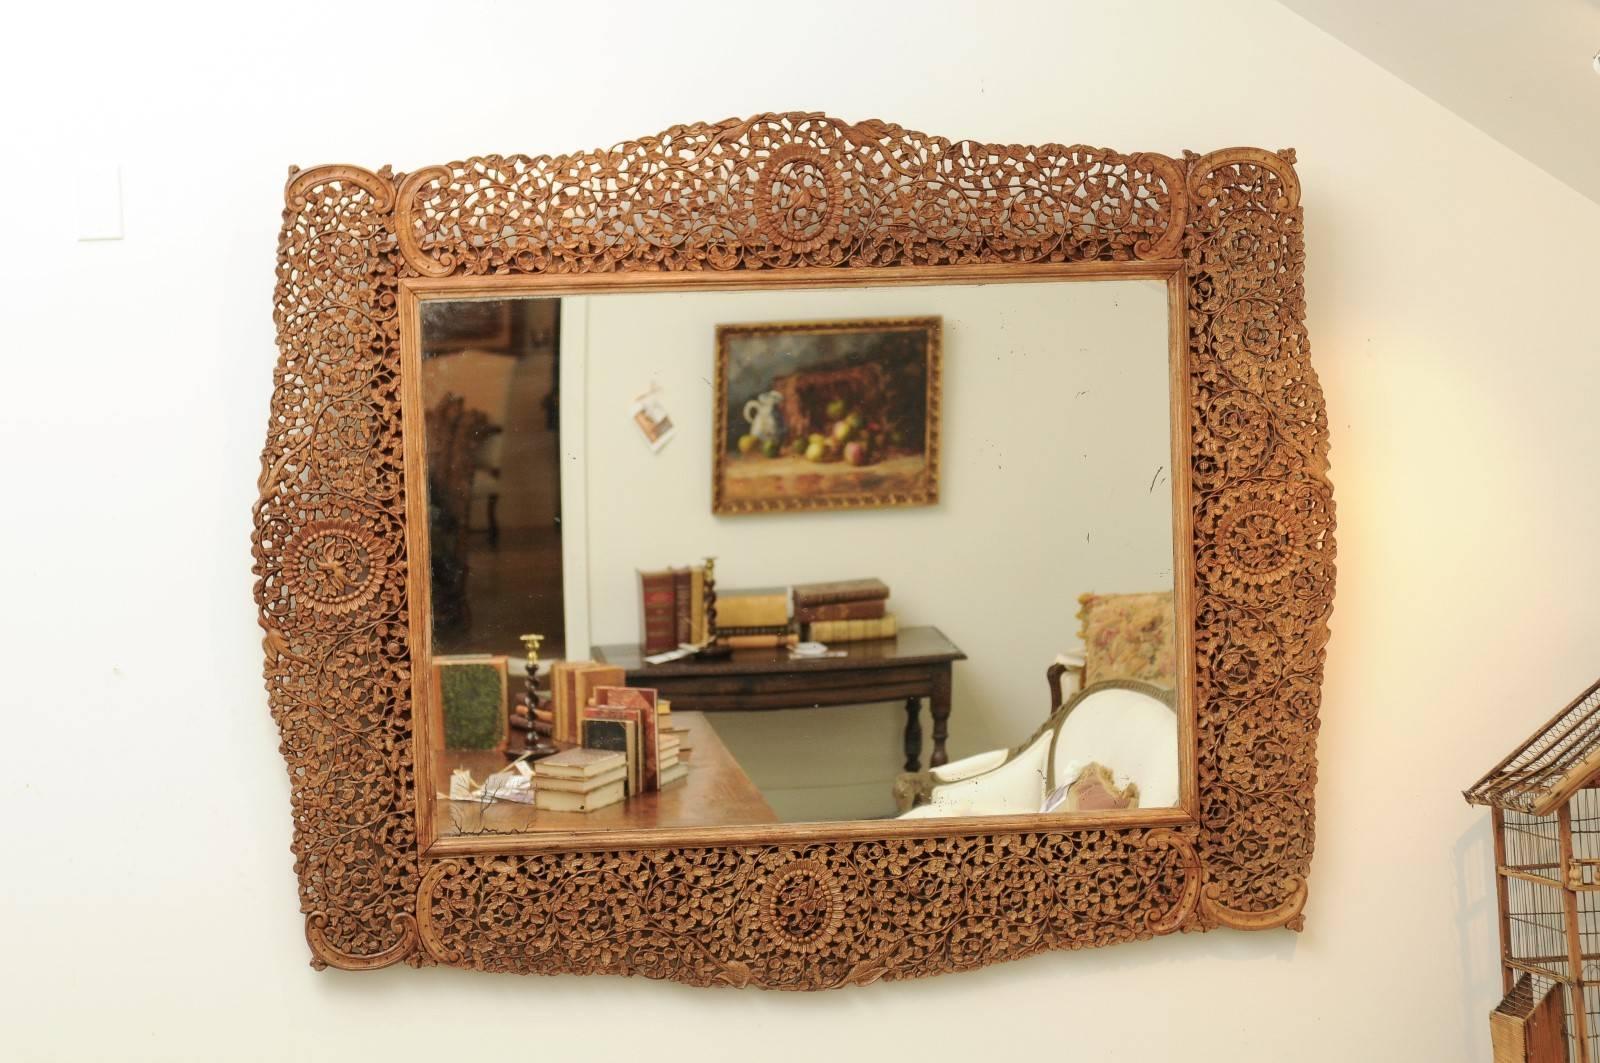 A wooden carved Burmese mirror with openwork design from the mid-19th century. This exquisite mirror was born in Myanmar, (former Burma) in the 1840s. Featuring an openwork design, the frame is adorned with a multitude of delicate rinceaux with